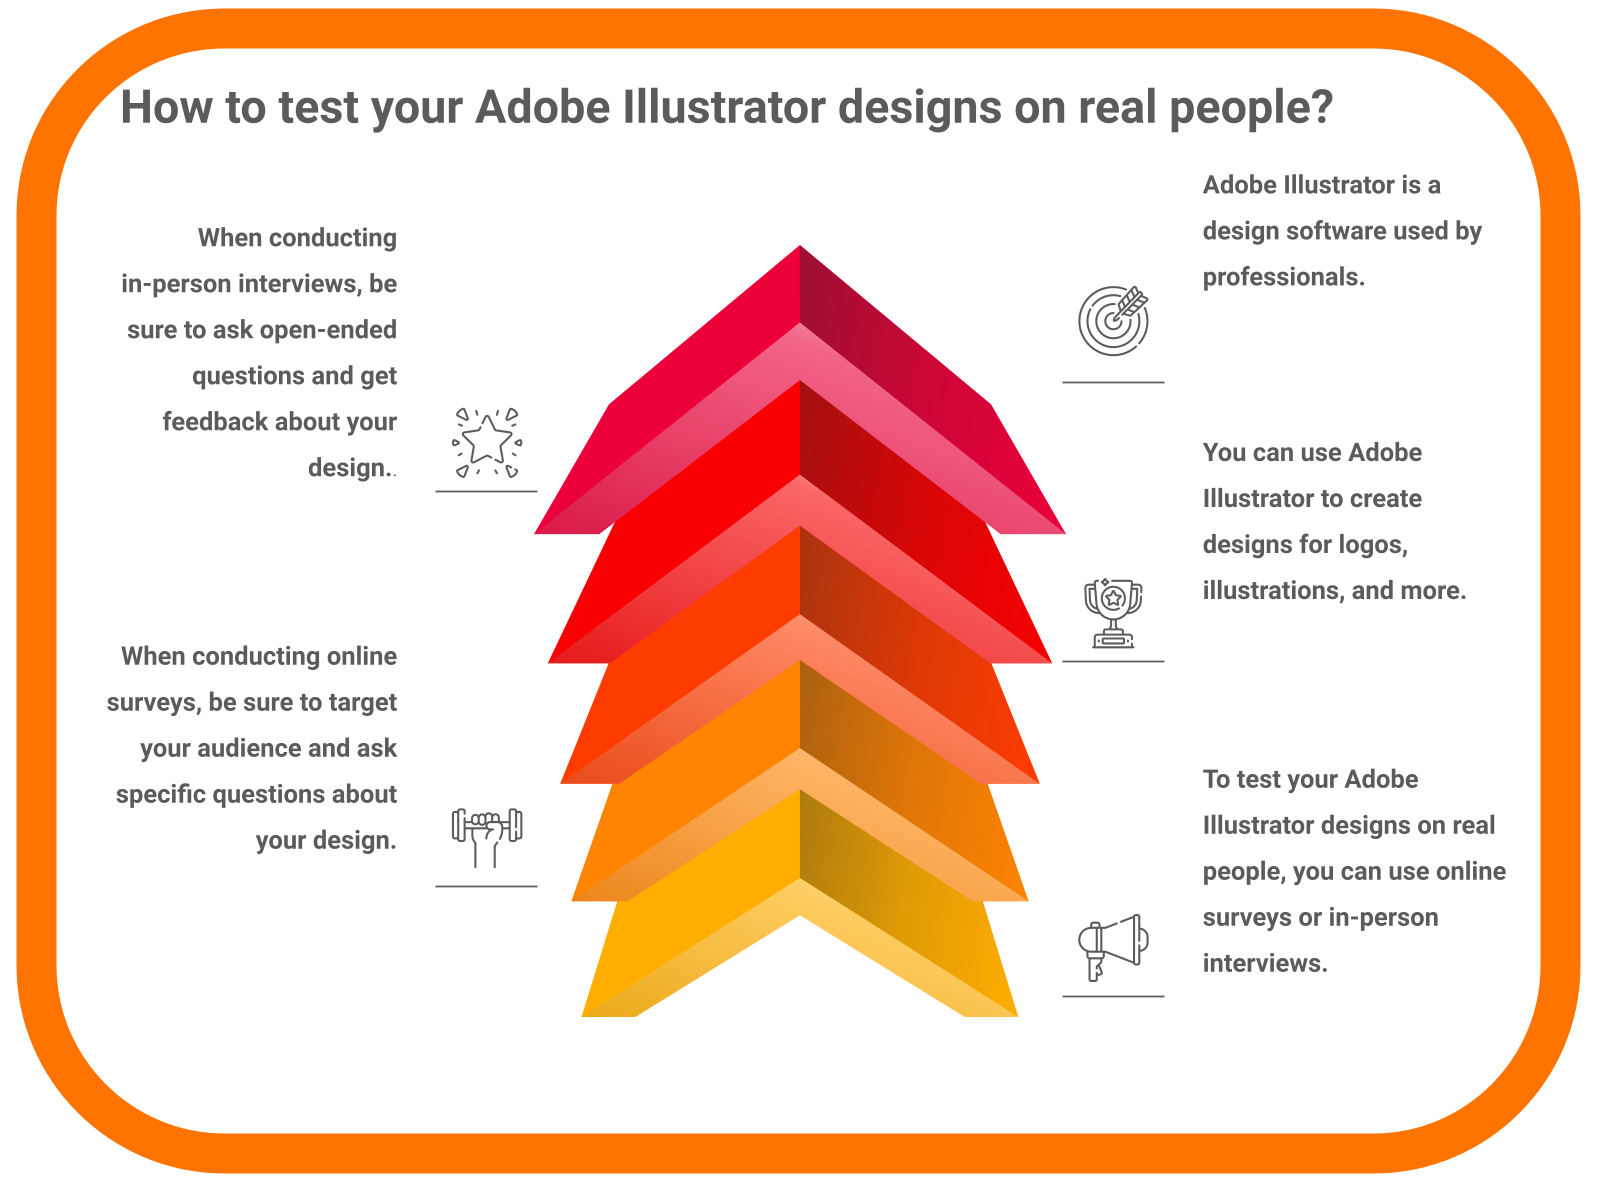 How to test your Adobe Illustrator designs on real people?